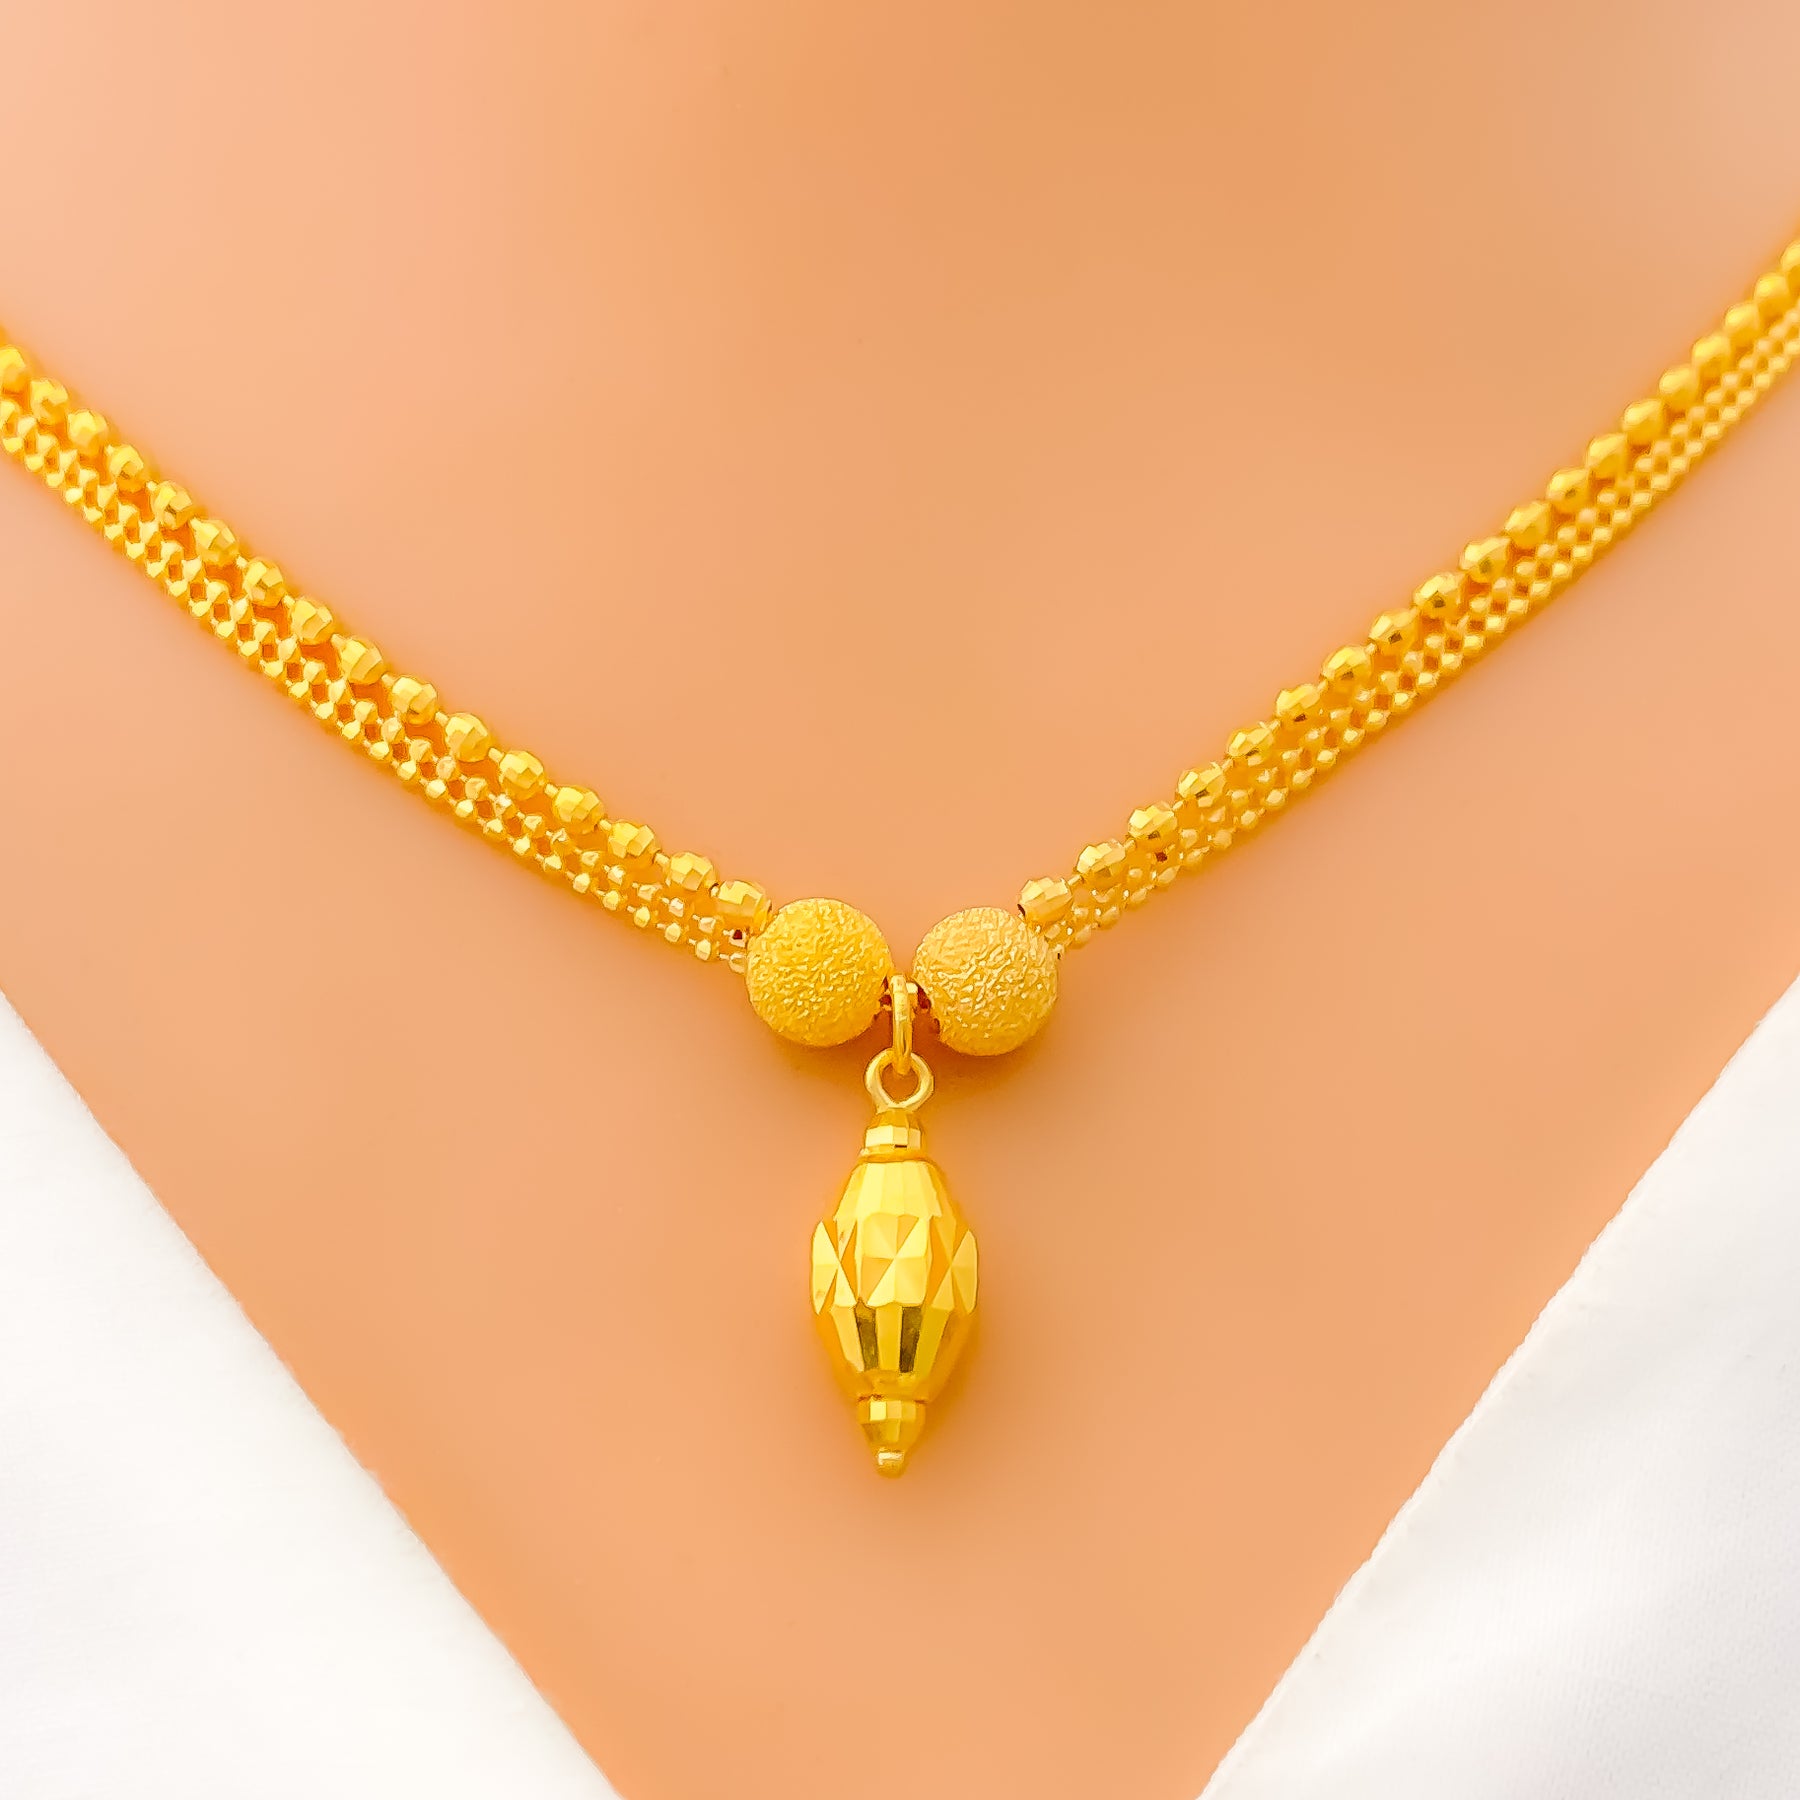 Gold Necklace | Necklace Designs | Light Weight Gold Necklace Designs